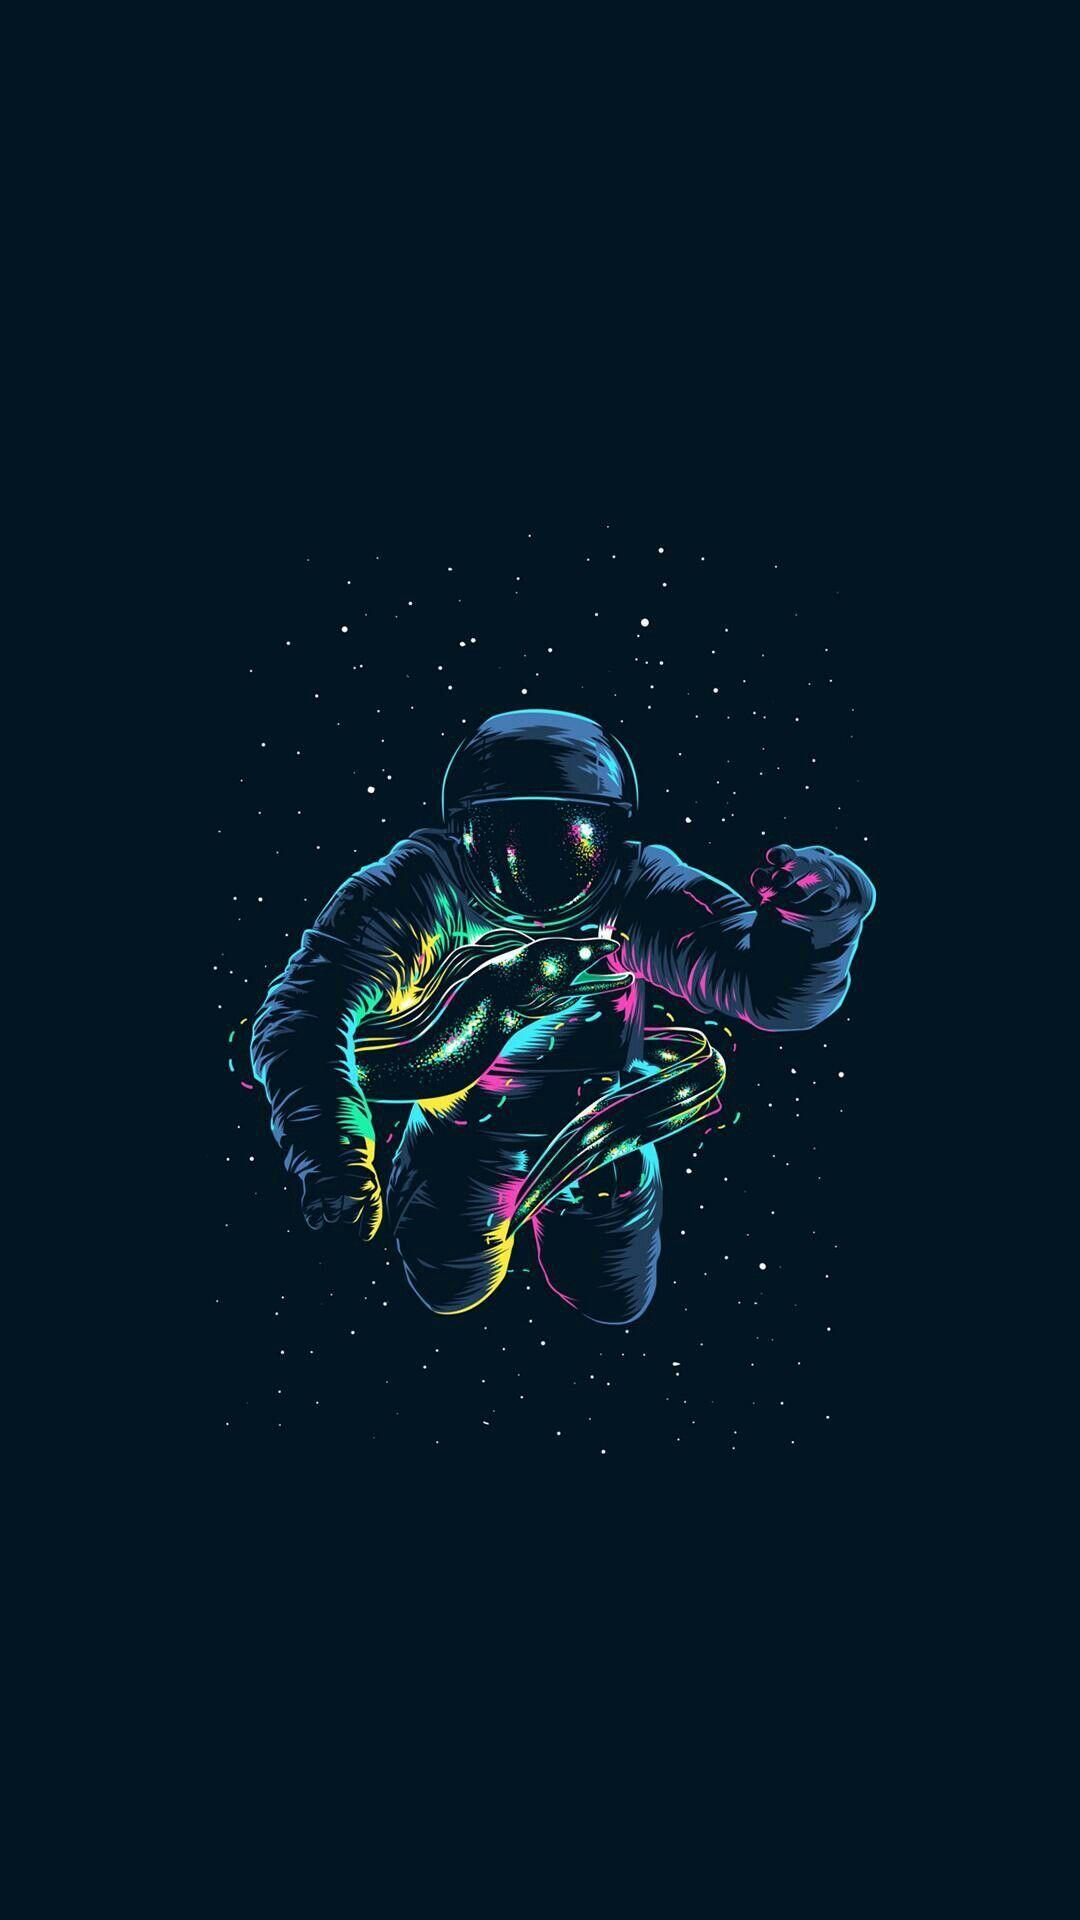 Space Trippy Wallpapers - Top Free Space Trippy Backgrounds ...